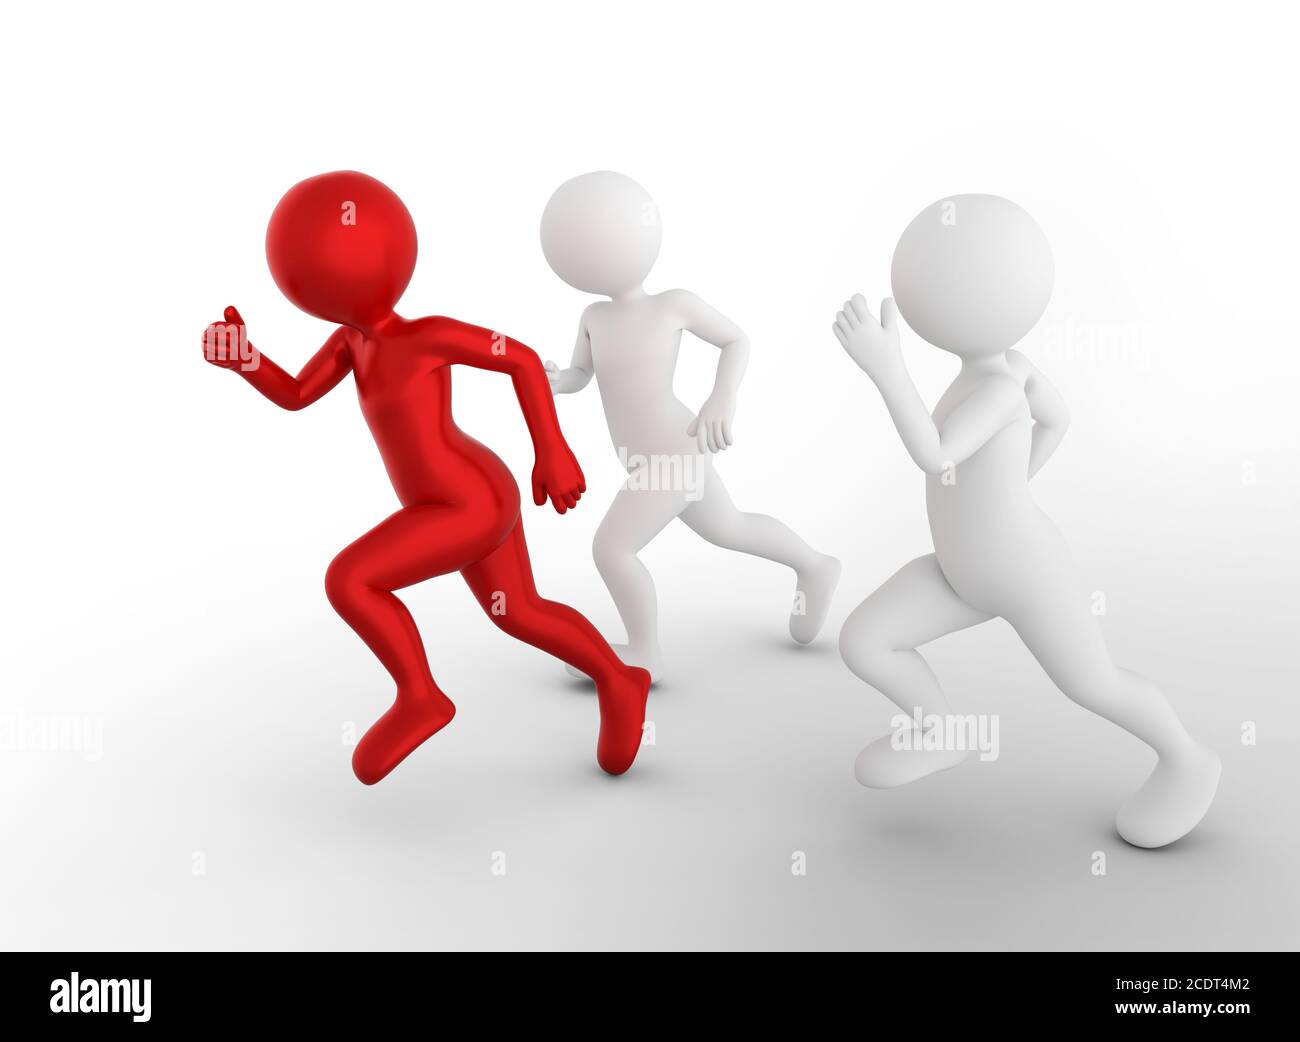 Running to be the first and win. Toon men compete, conceptual Stock Photo